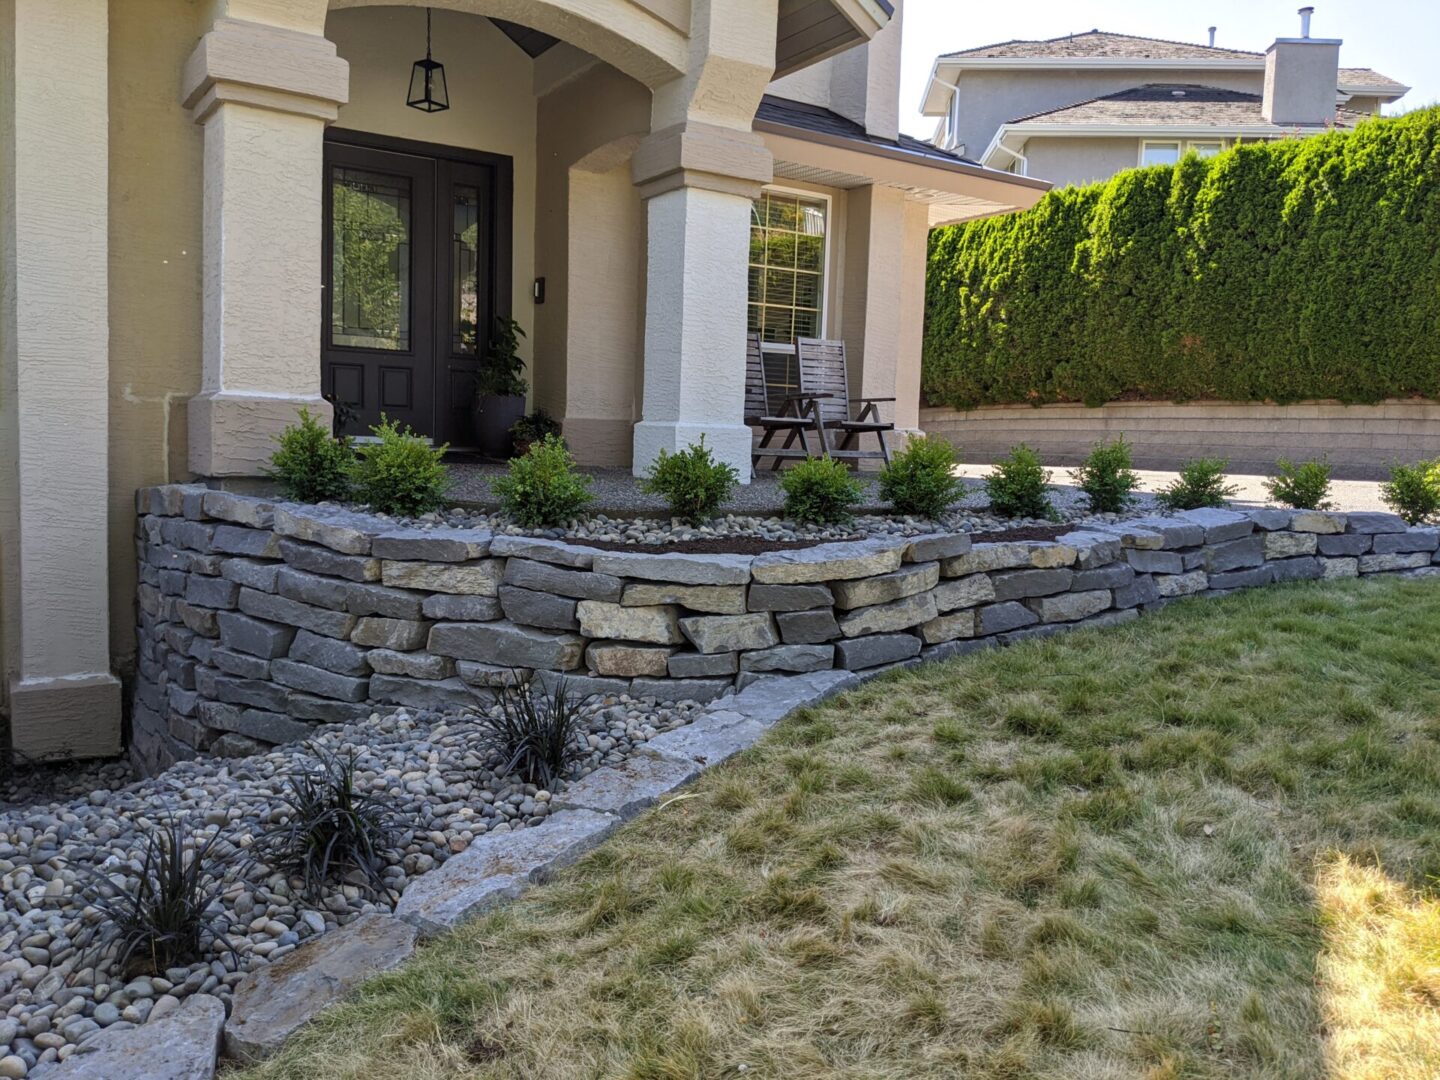 Front yard of a house with a stone retaining wall, landscaped garden, and a chair by the door.